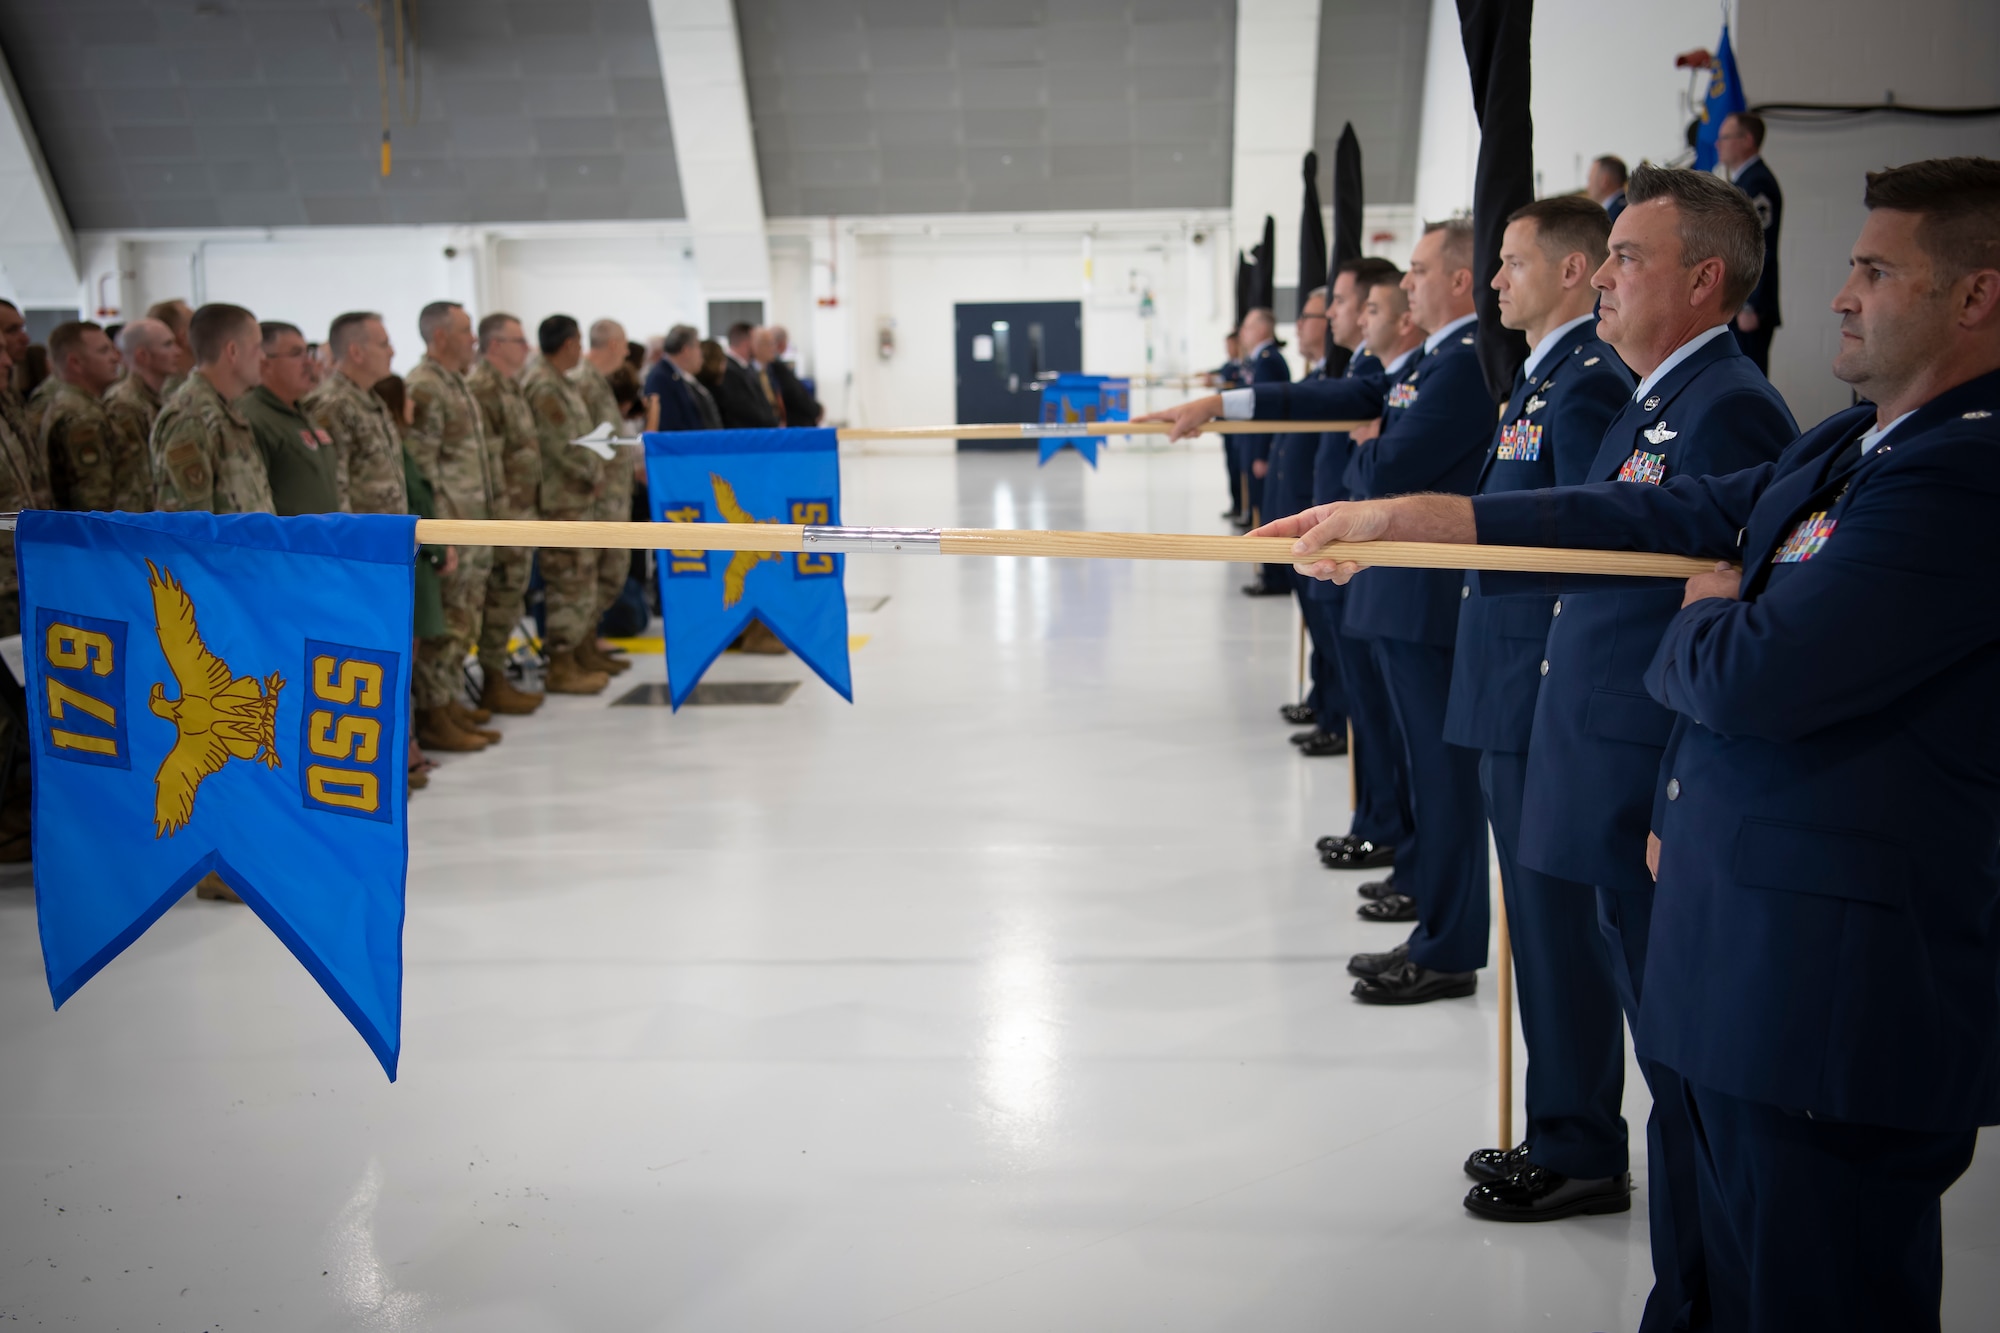 Squadron guidon flags presented at 179th redesignation ceremony